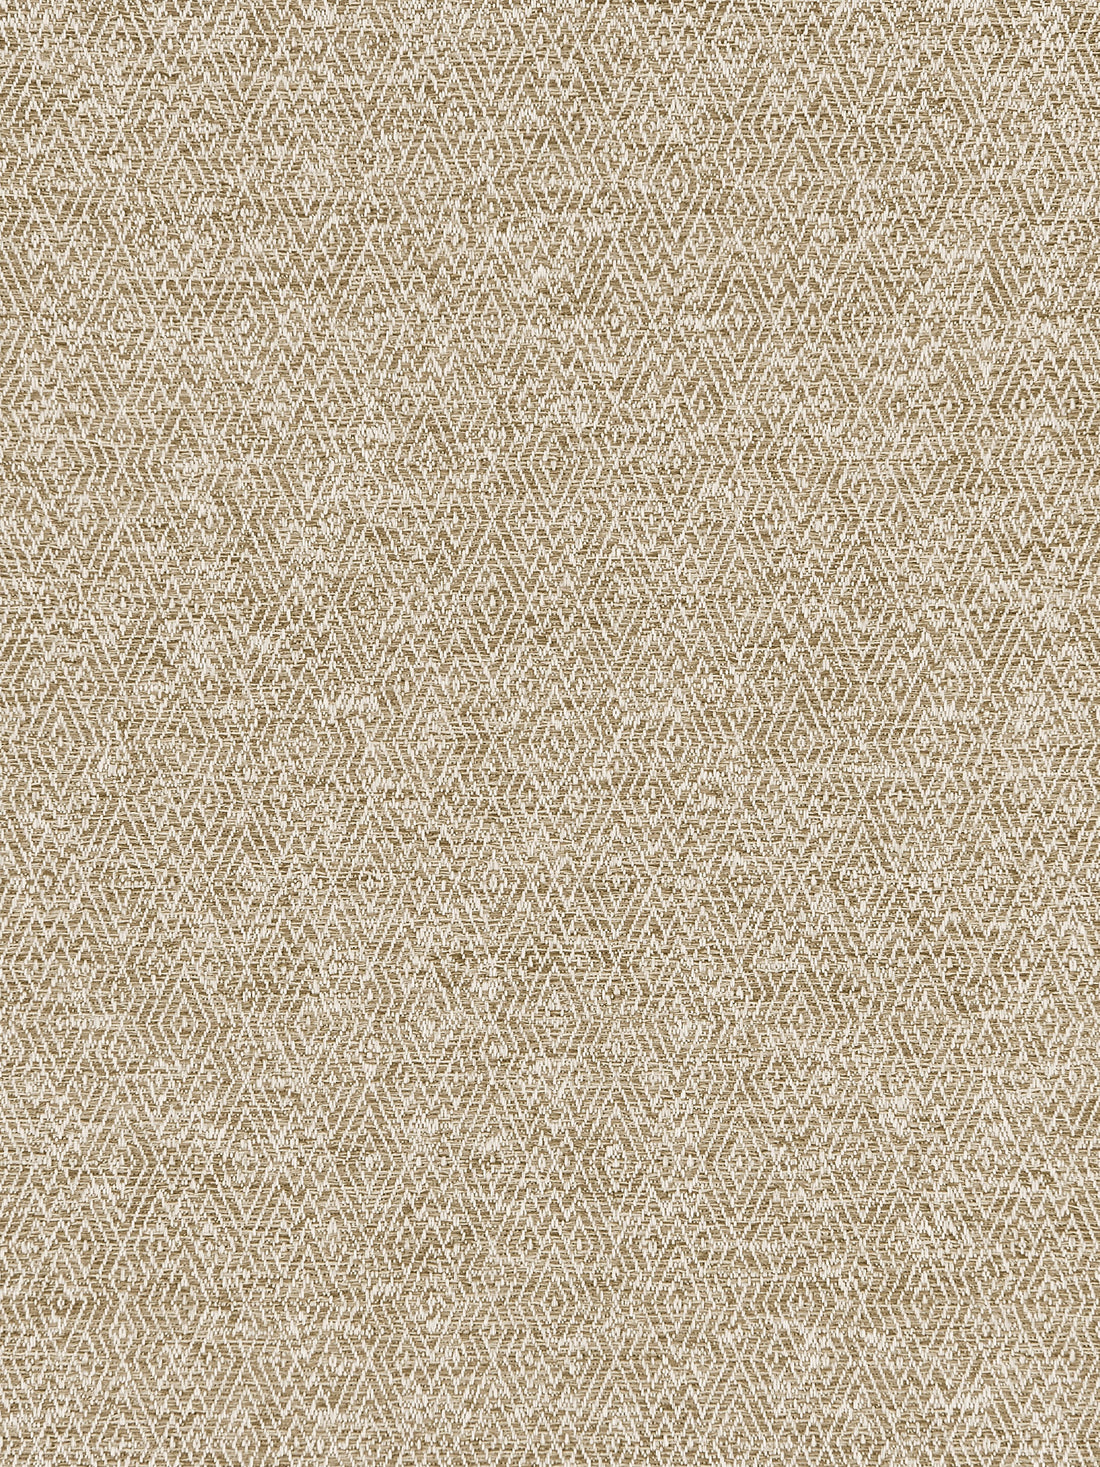 La Caleta fabric in driftwood color - pattern number NK 0090CALE - by Scalamandre in the Old World Weavers collection